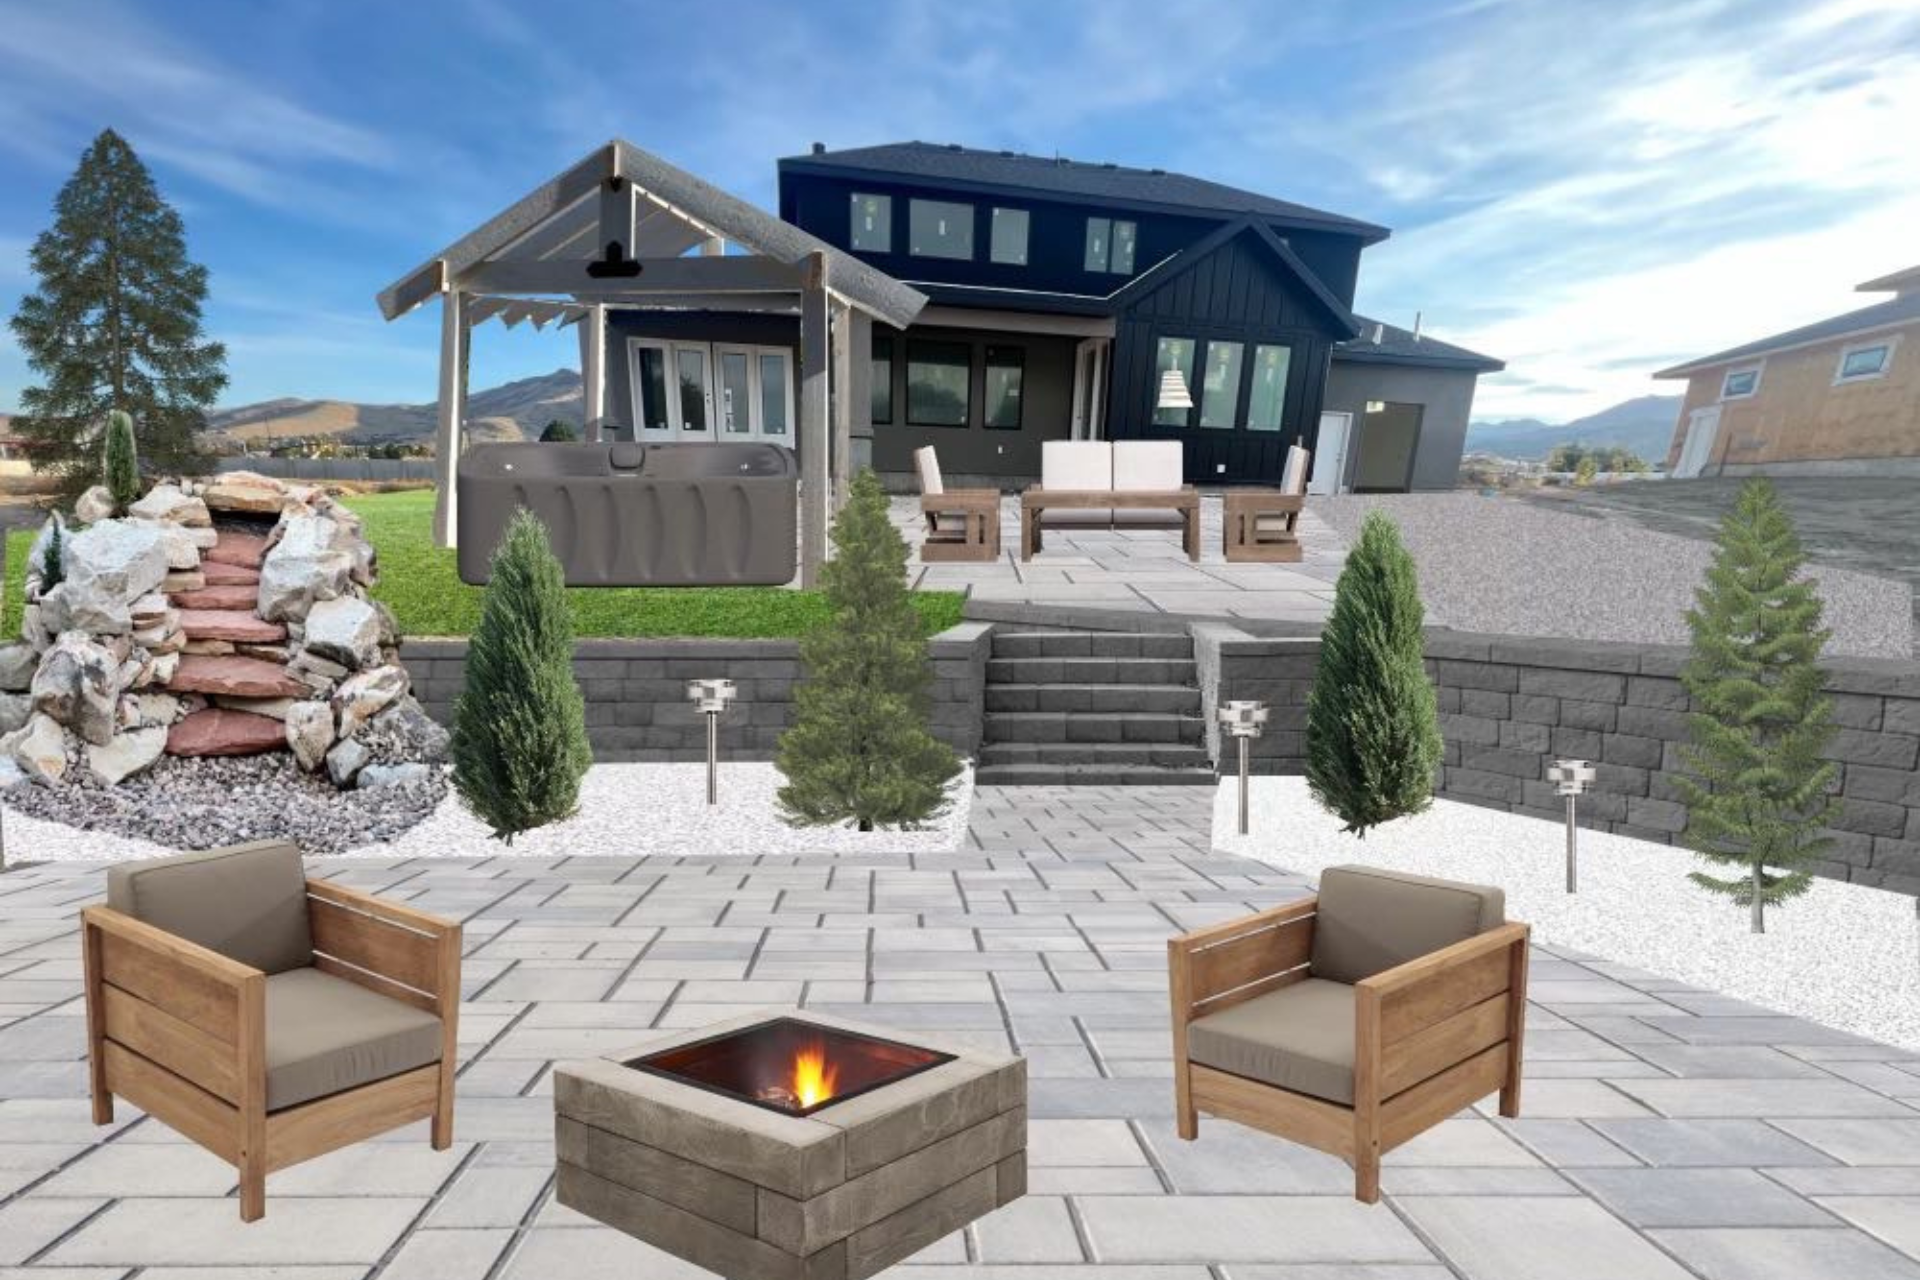 A  landscape design with patio with chairs and a fire pit in front of a house